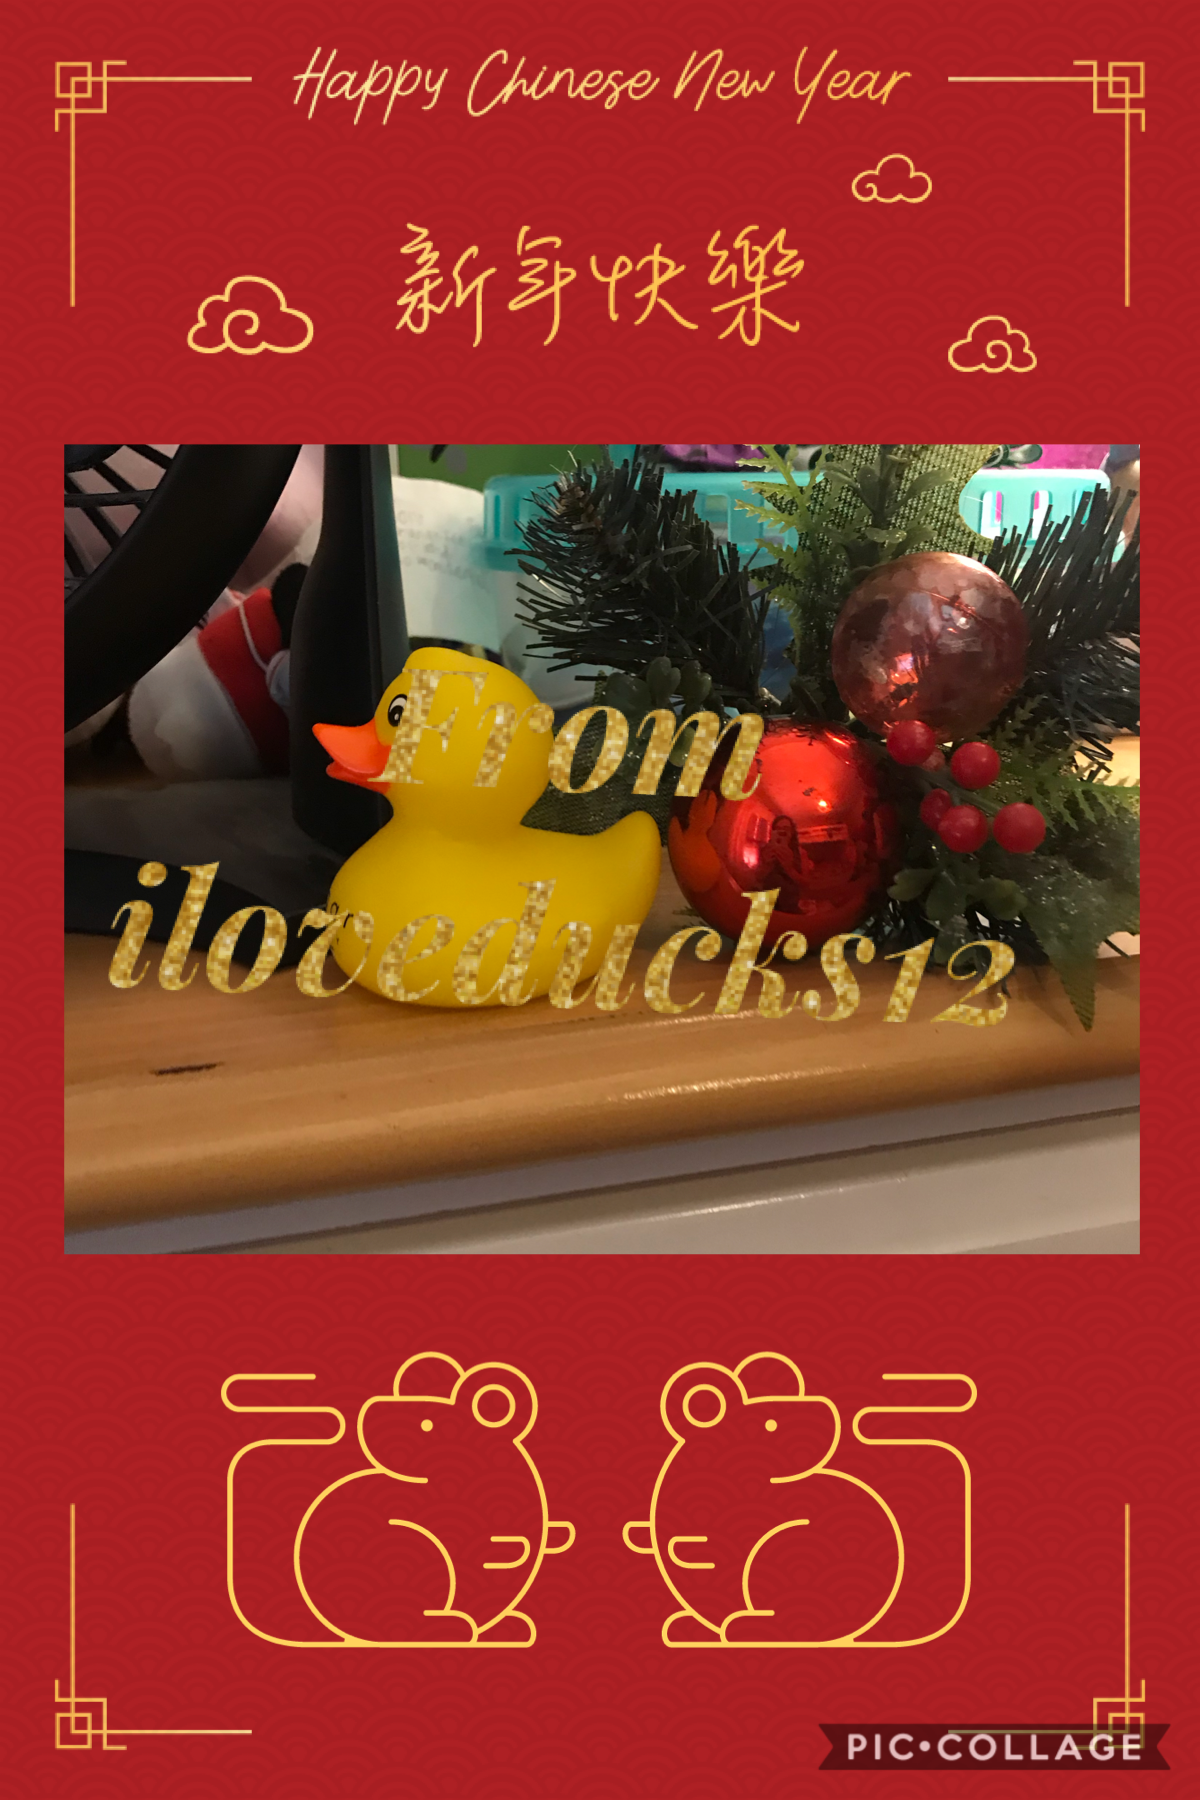 Happy Chinese New Year!  (Tap)        
 From iloveducks12